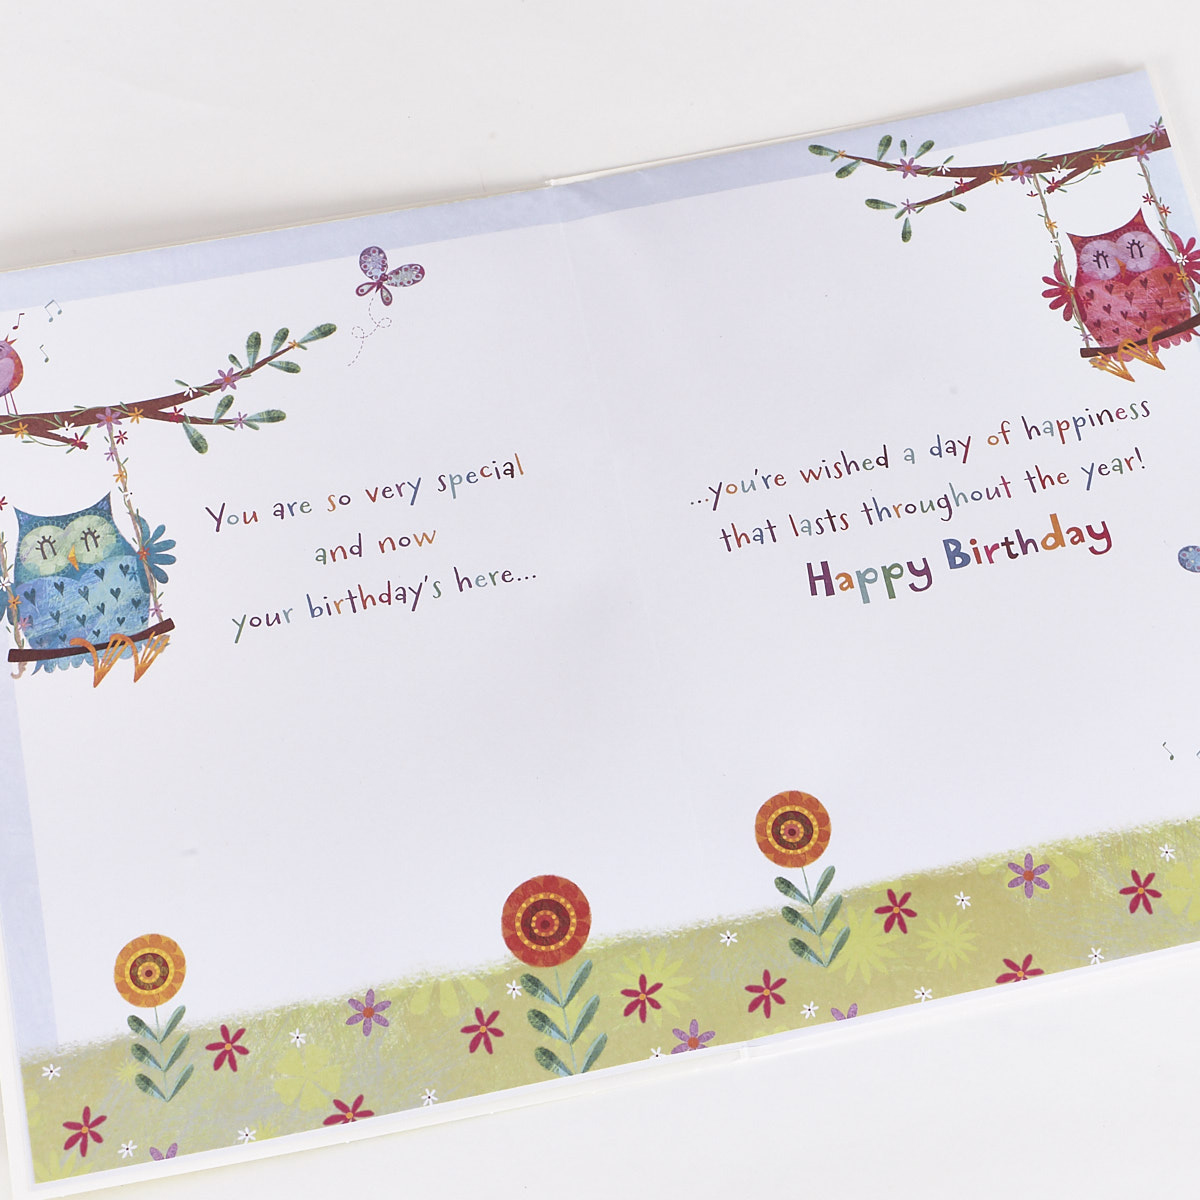 Signature Collection Birthday Card - Lovely Friend, Owls